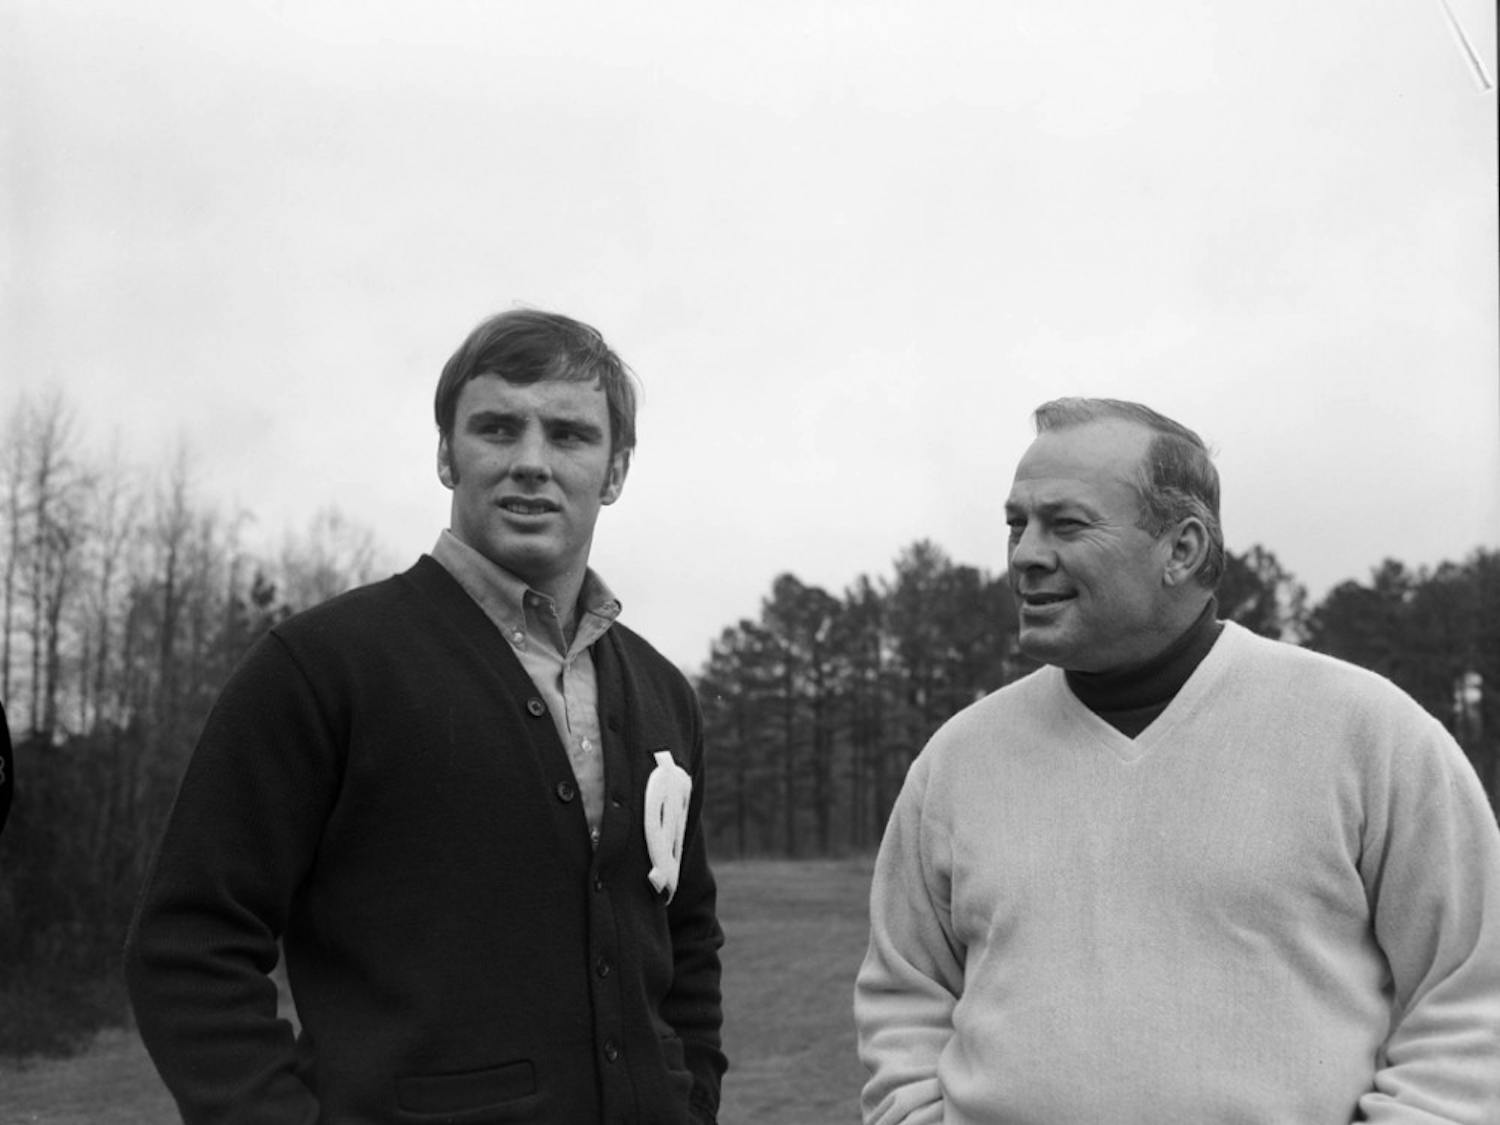 	Former UNC football player Don McCauley (left) stands with Charlie “Choo Choo” Justice in the early 1970s.  Photo courtesy of Wilson Library.